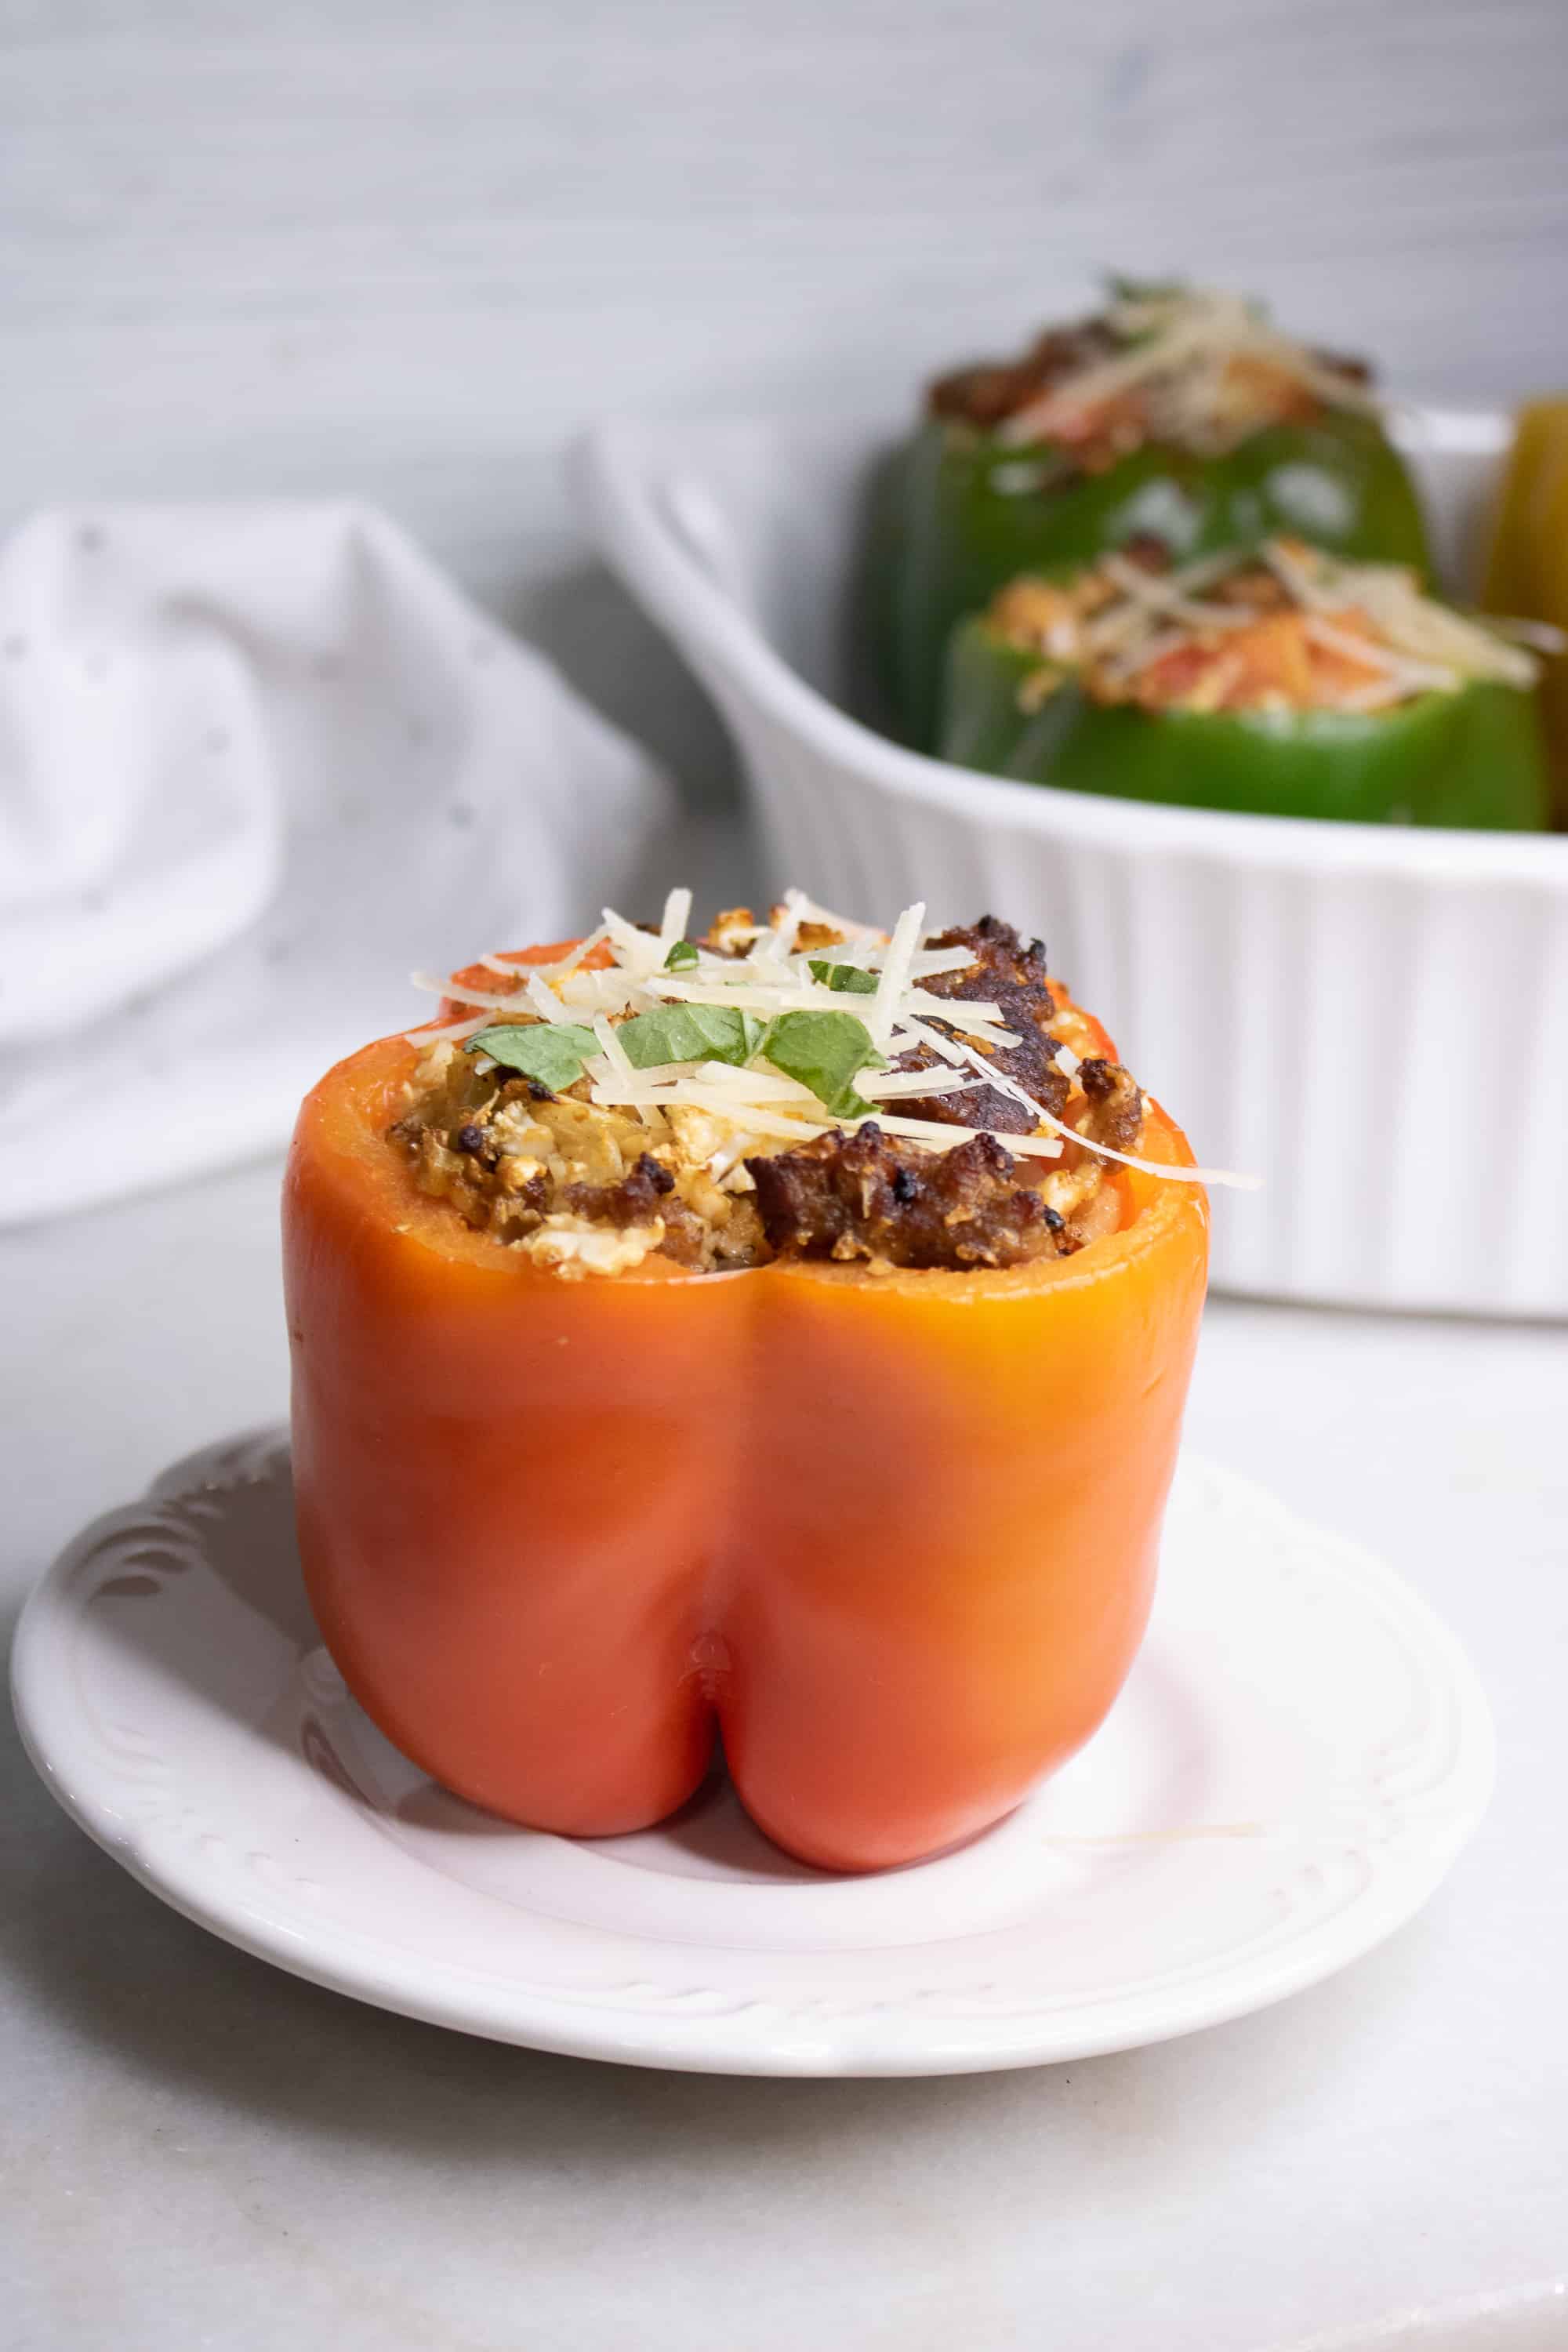 An Italian sausage and cauliflower rice stuffed pepper sitting on a white serving plate